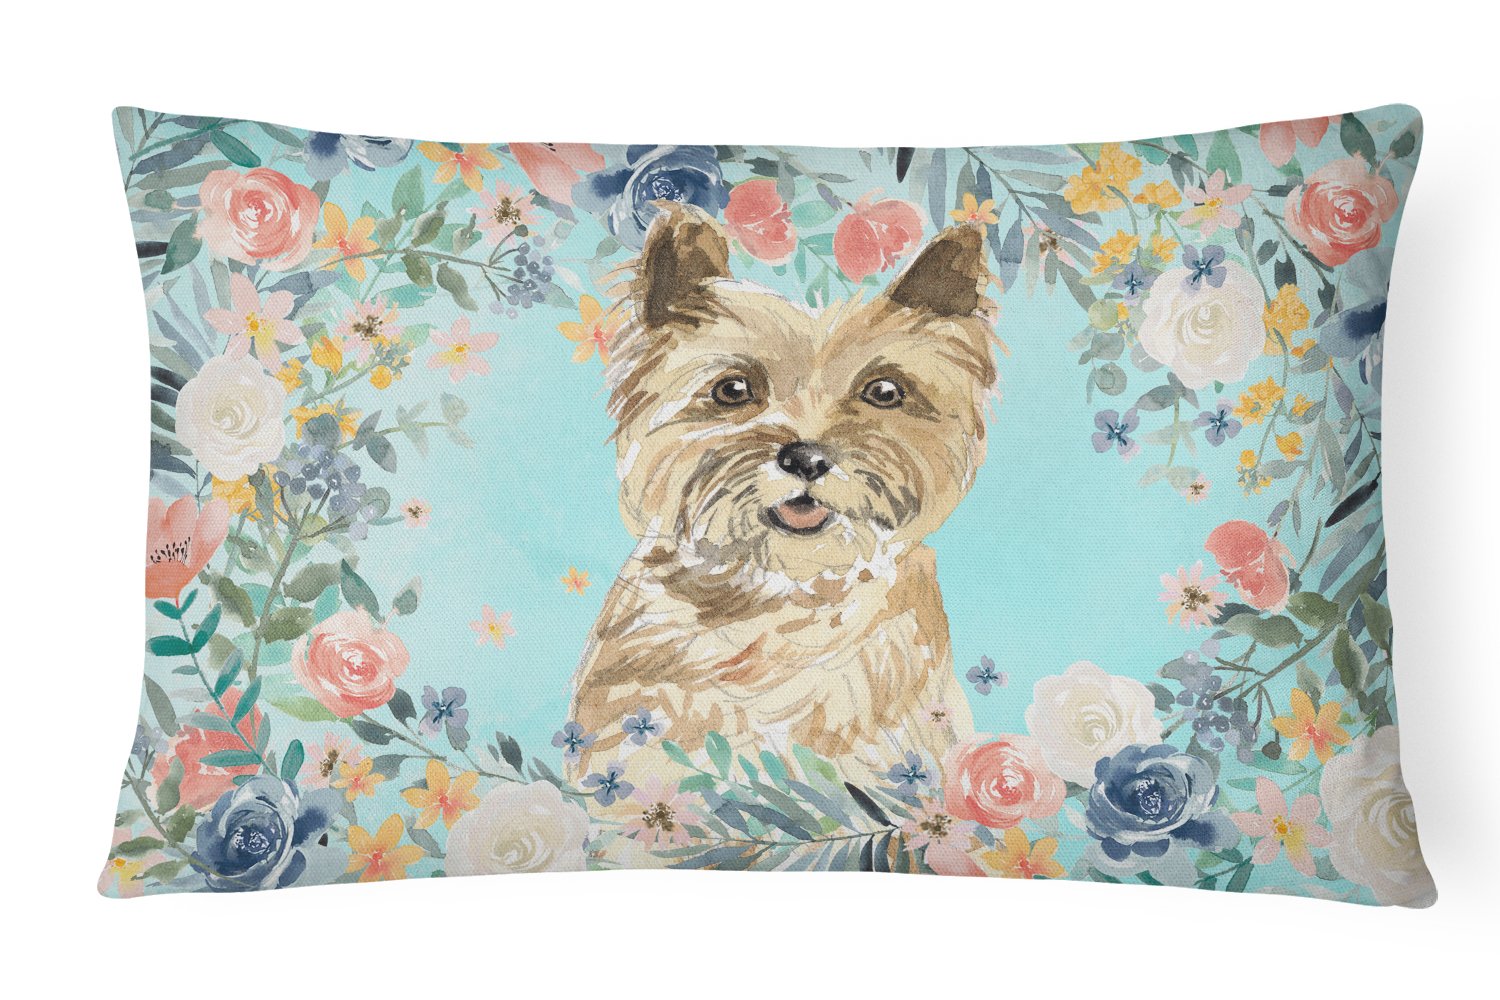 Cairn Terrier Canvas Fabric Decorative Pillow CK3430PW1216 by Caroline's Treasures